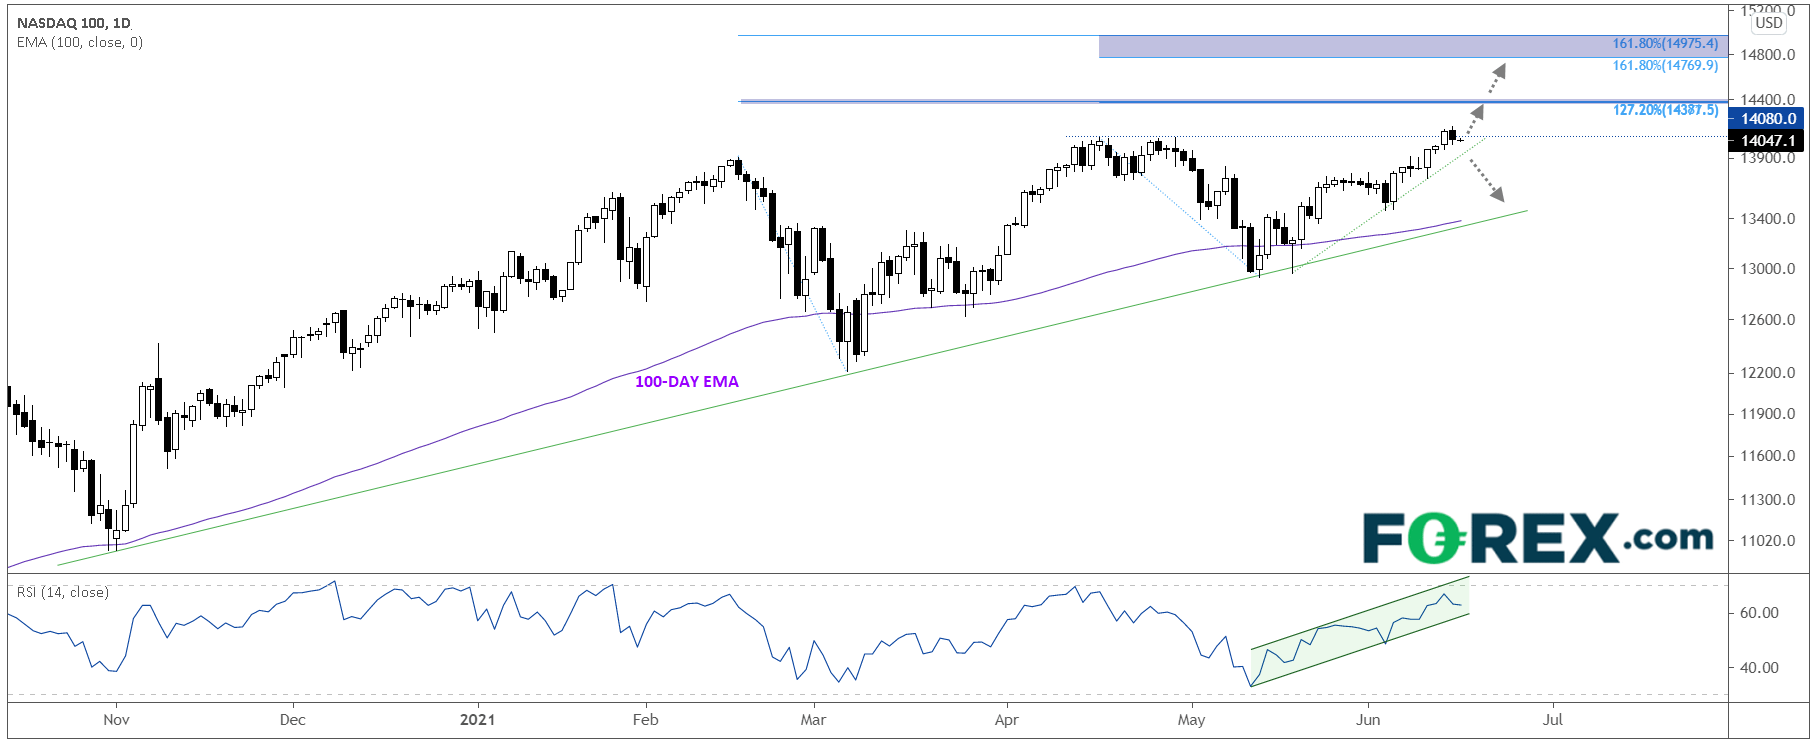 Chart analysis shows Nasdaq 100 Hovering Near Record Highs Ahead Of The Fed. Published in June 2021 by FOREX.com